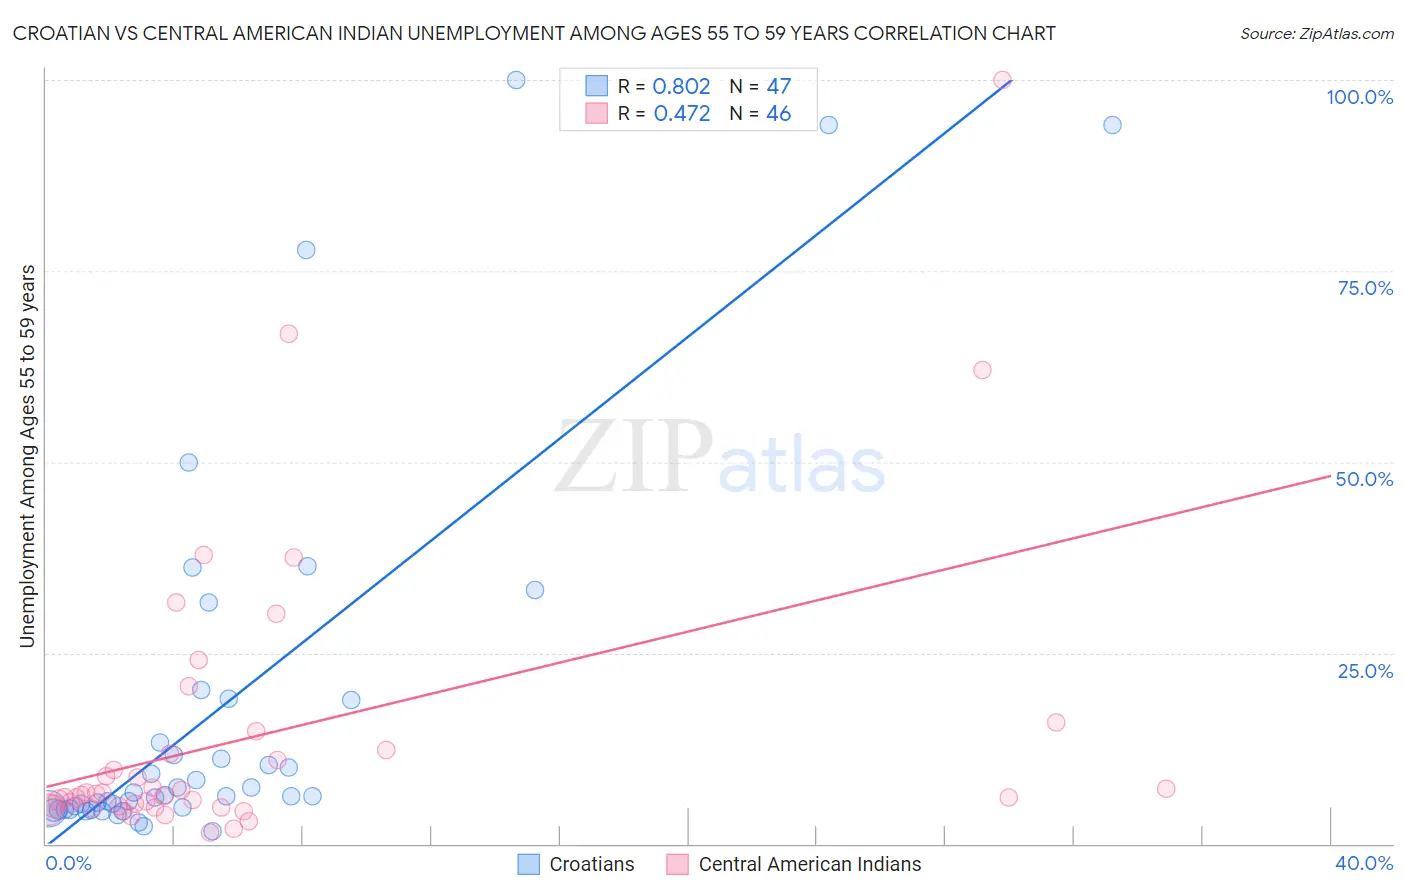 Croatian vs Central American Indian Unemployment Among Ages 55 to 59 years